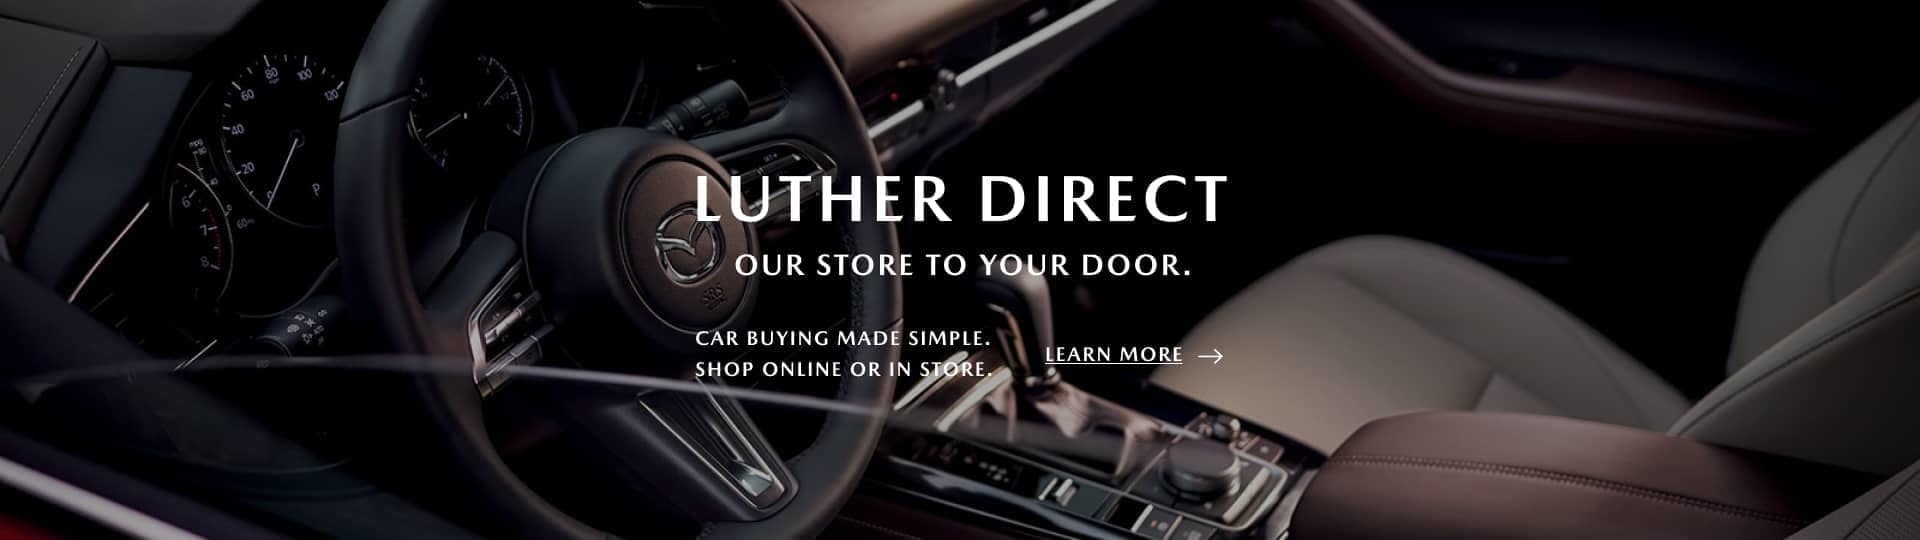 luther-direct-di-slider-1920x540